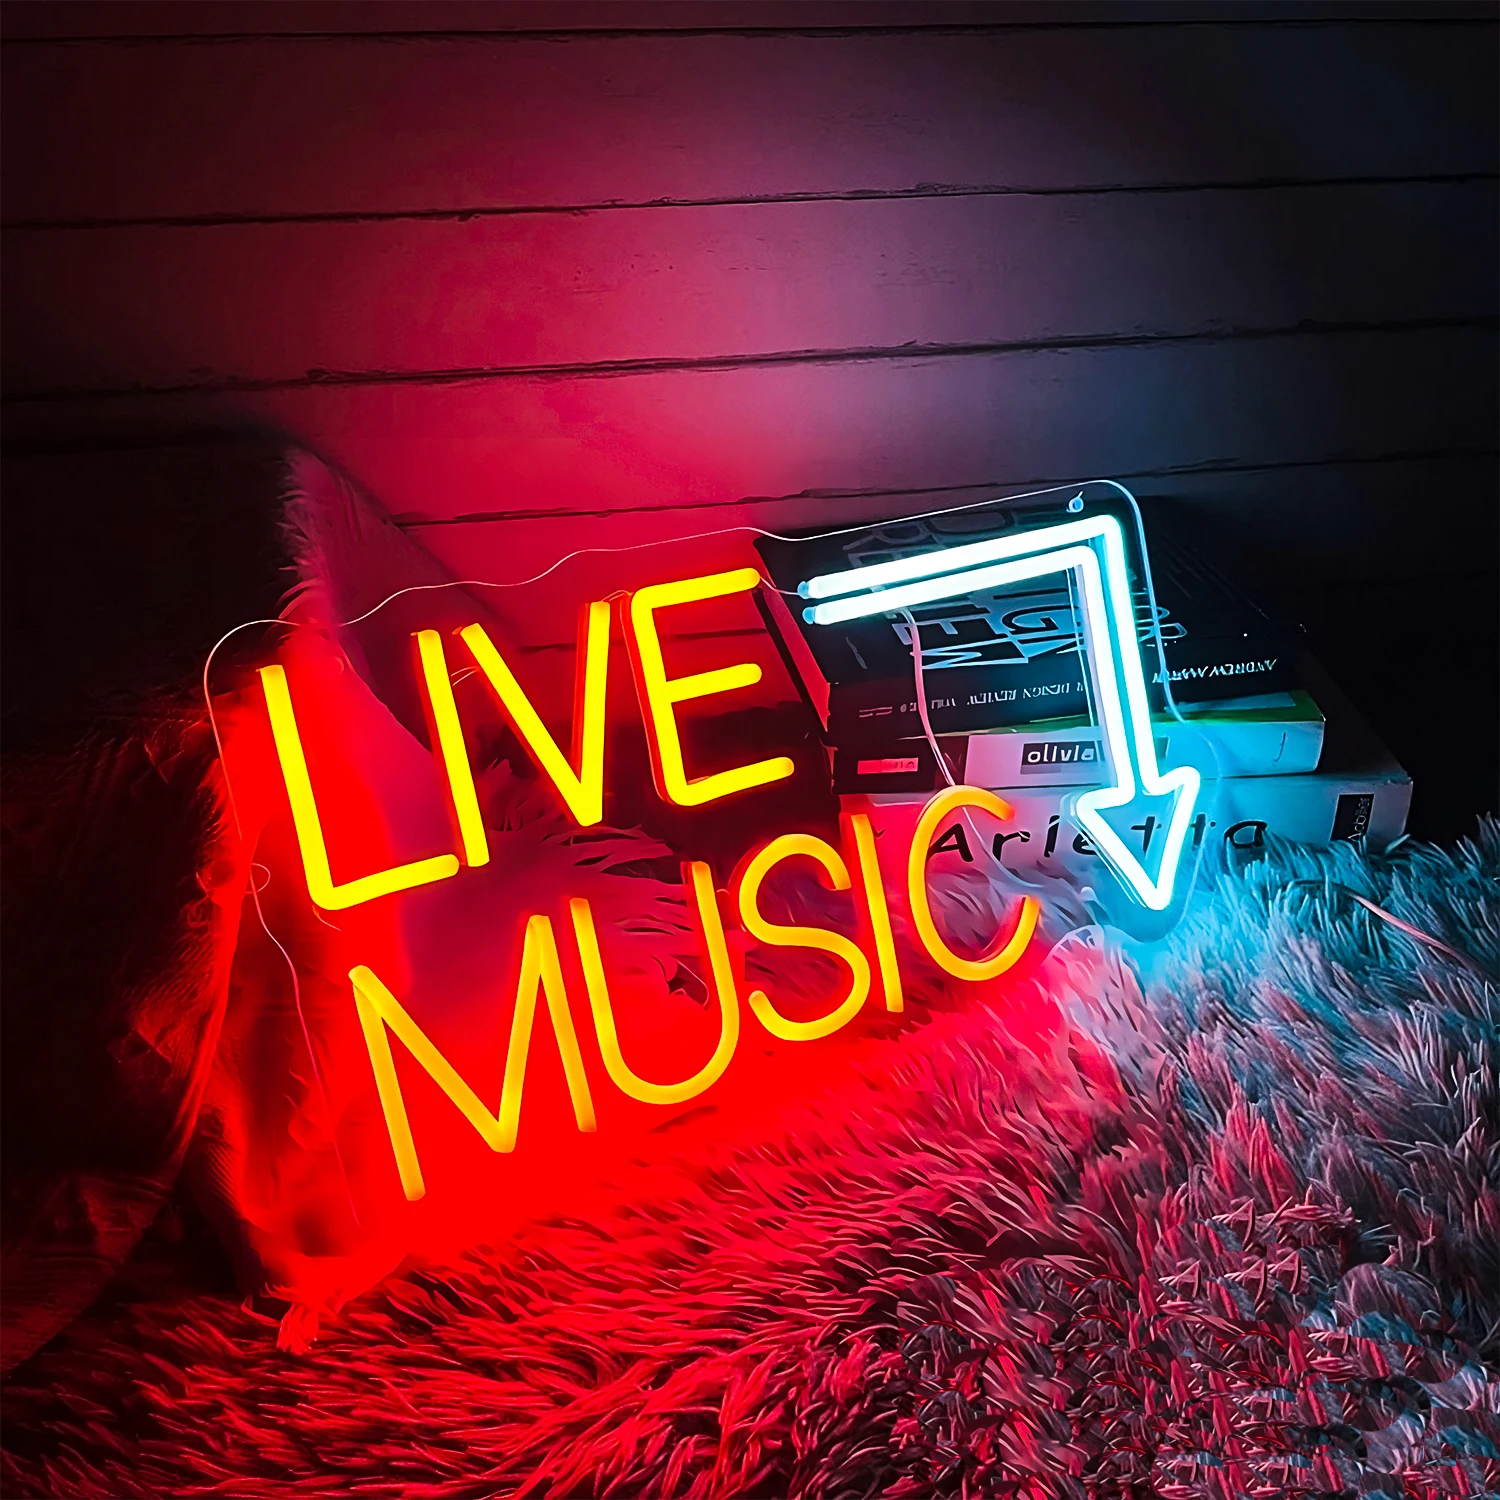 Live Music Custom LED Neon Sign Personalized Dimmable Neon Light Up Sign Bar Nightclub Music Studio Wall Decor Living Room Decor